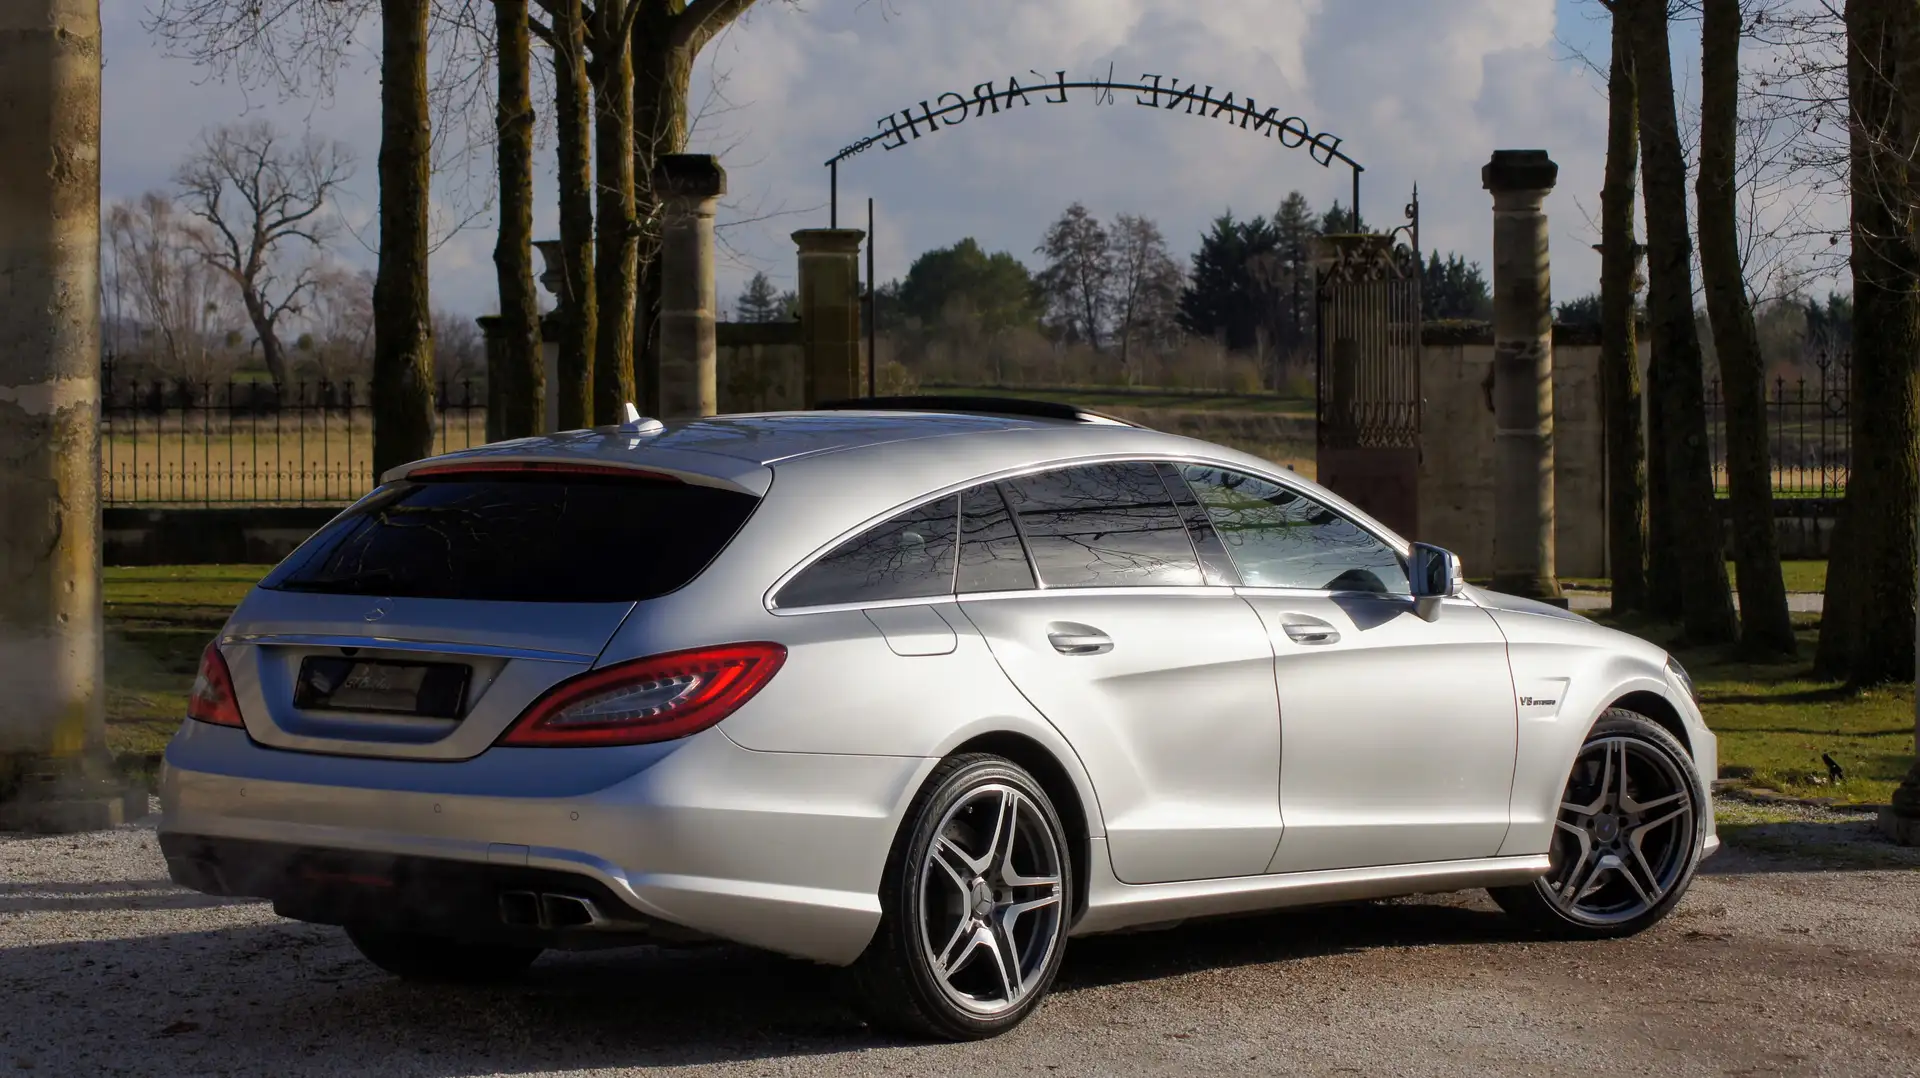 Mercedes-Benz CLS 63 AMG Shooting Brake - Historique, nb options, TBE Silver - 2